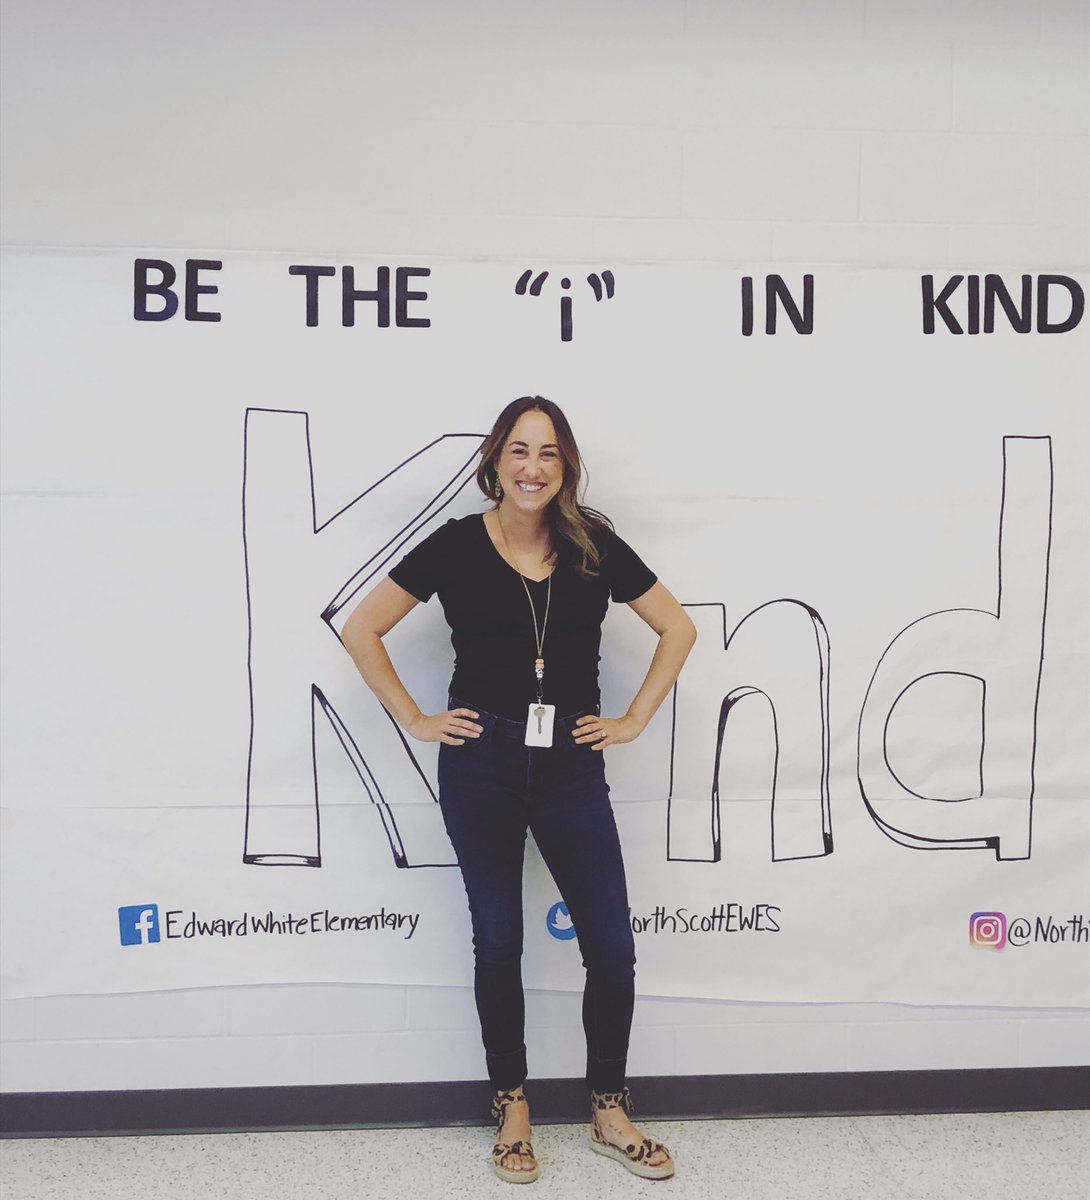 Be the “i” in kind #teachthemkindness #cooltobekind